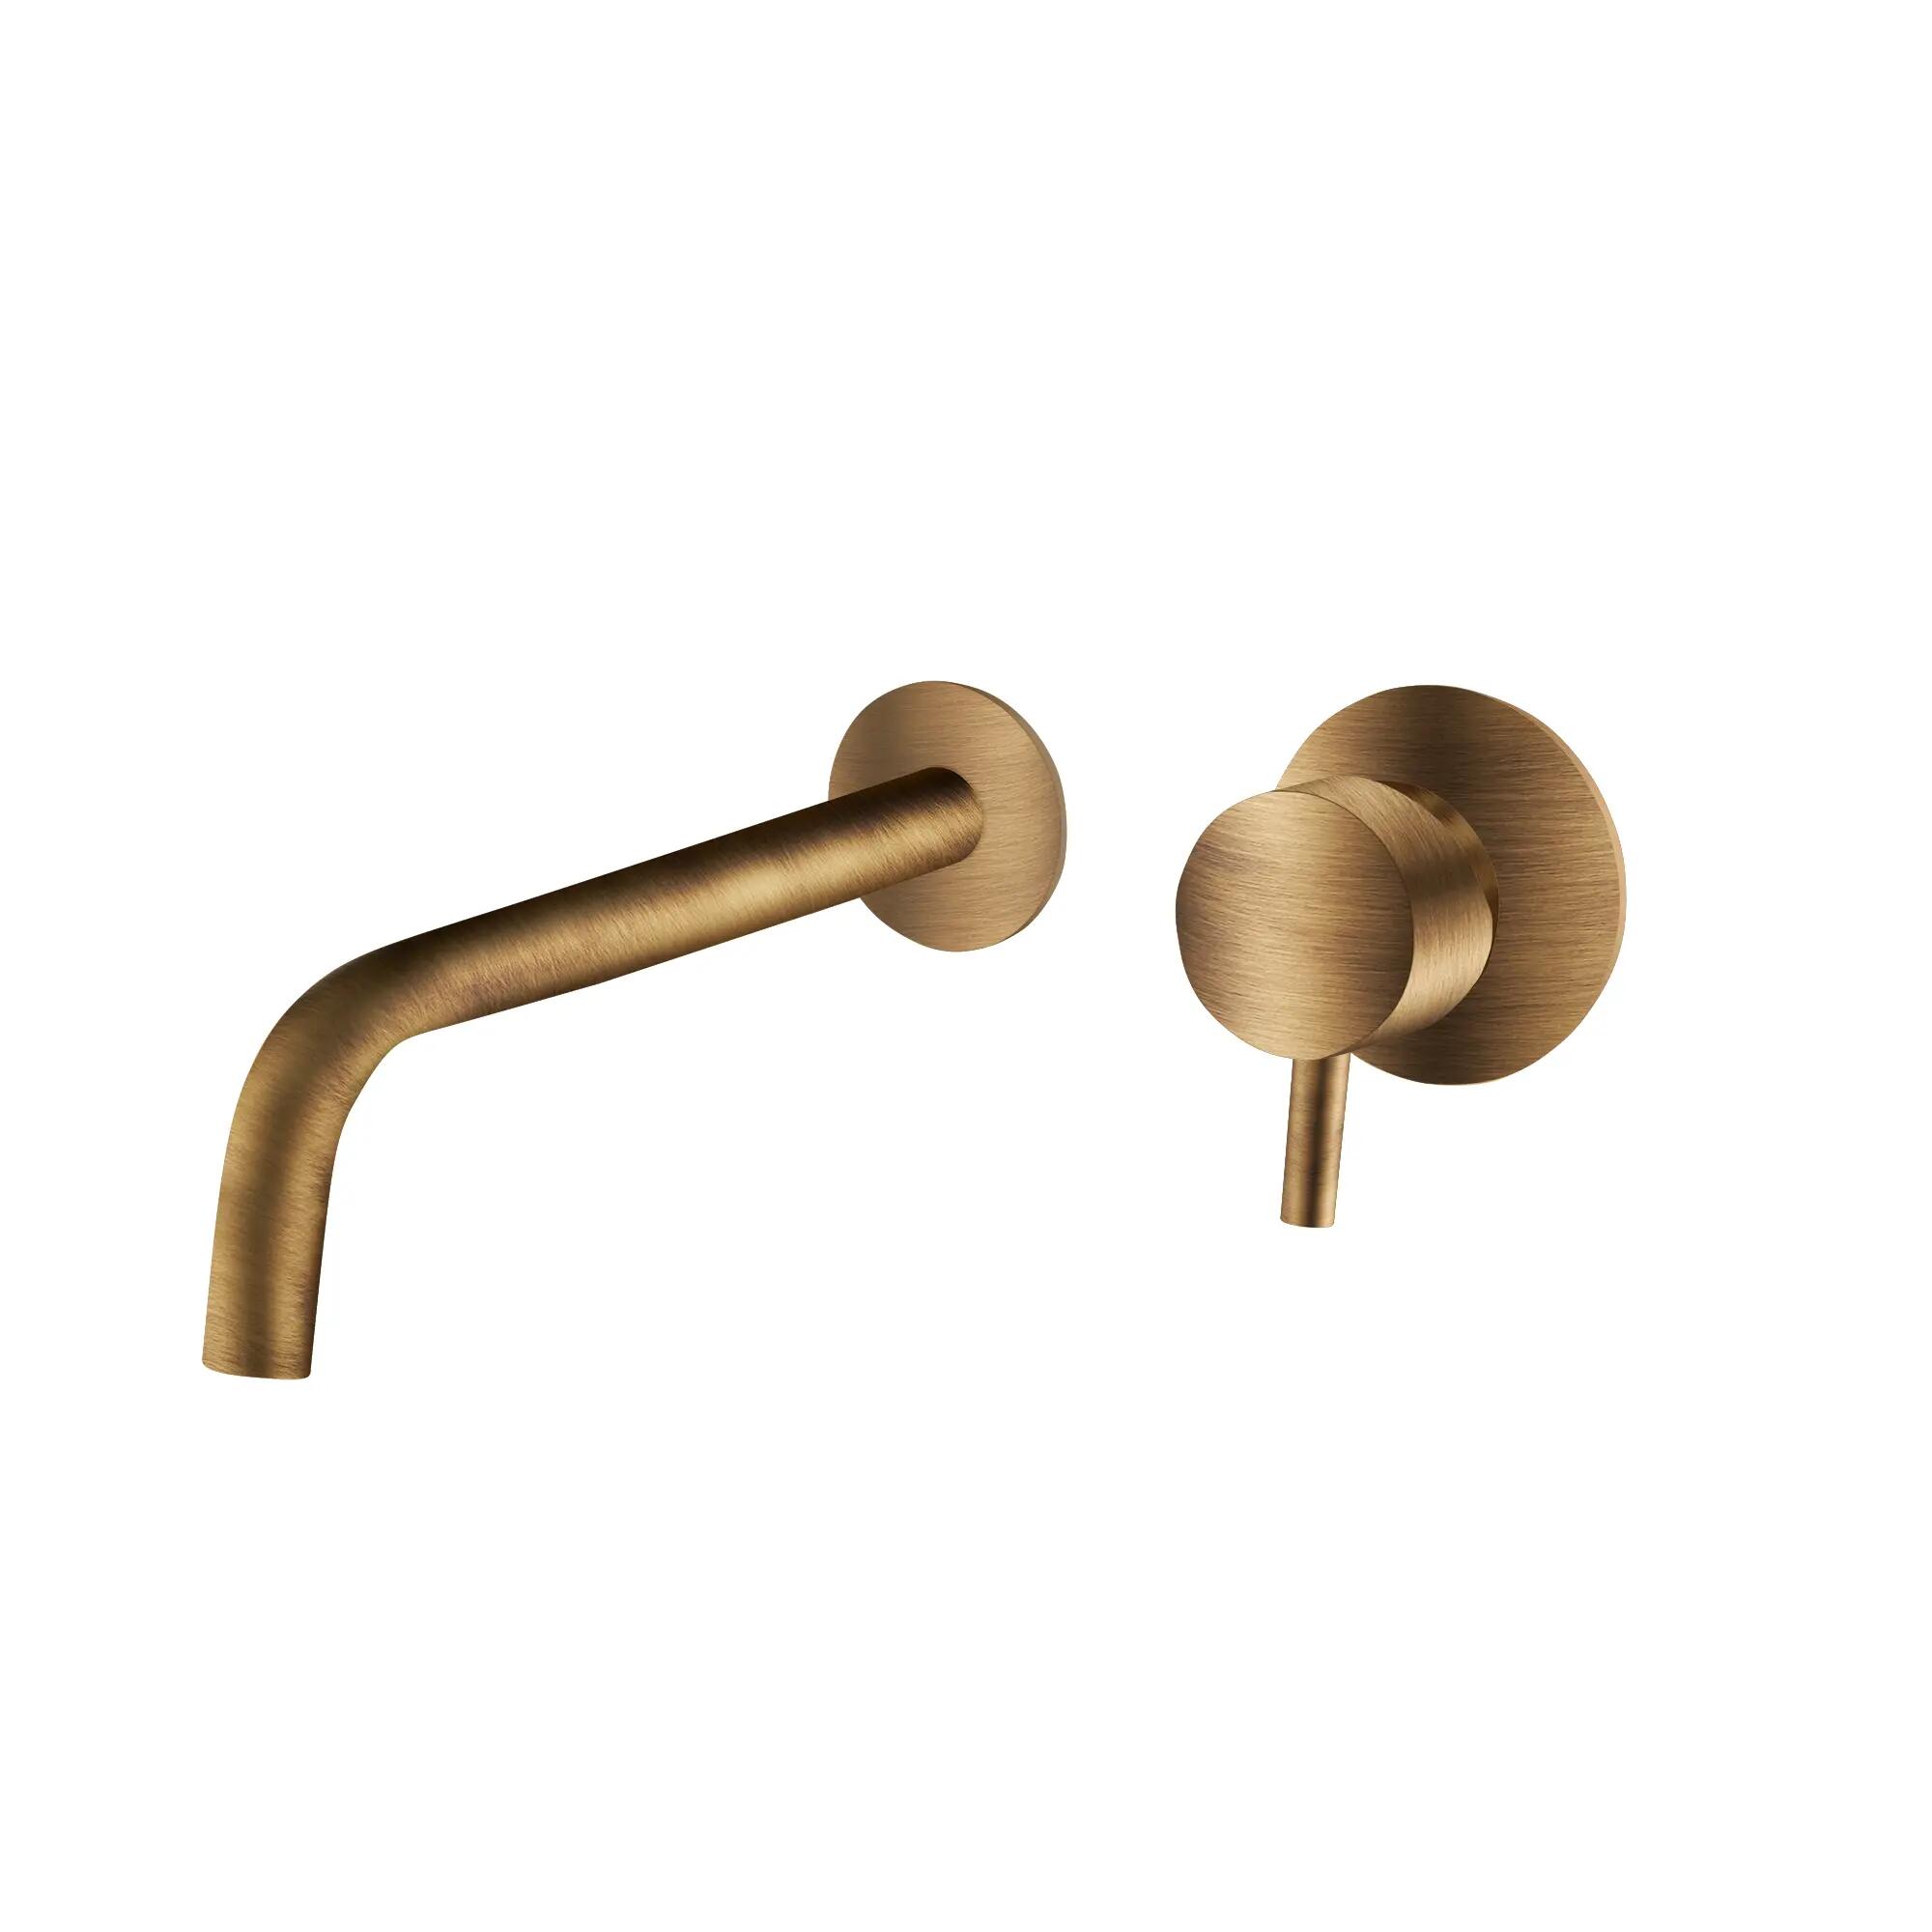 Grifo lavabo empotrado maier look bronce mate